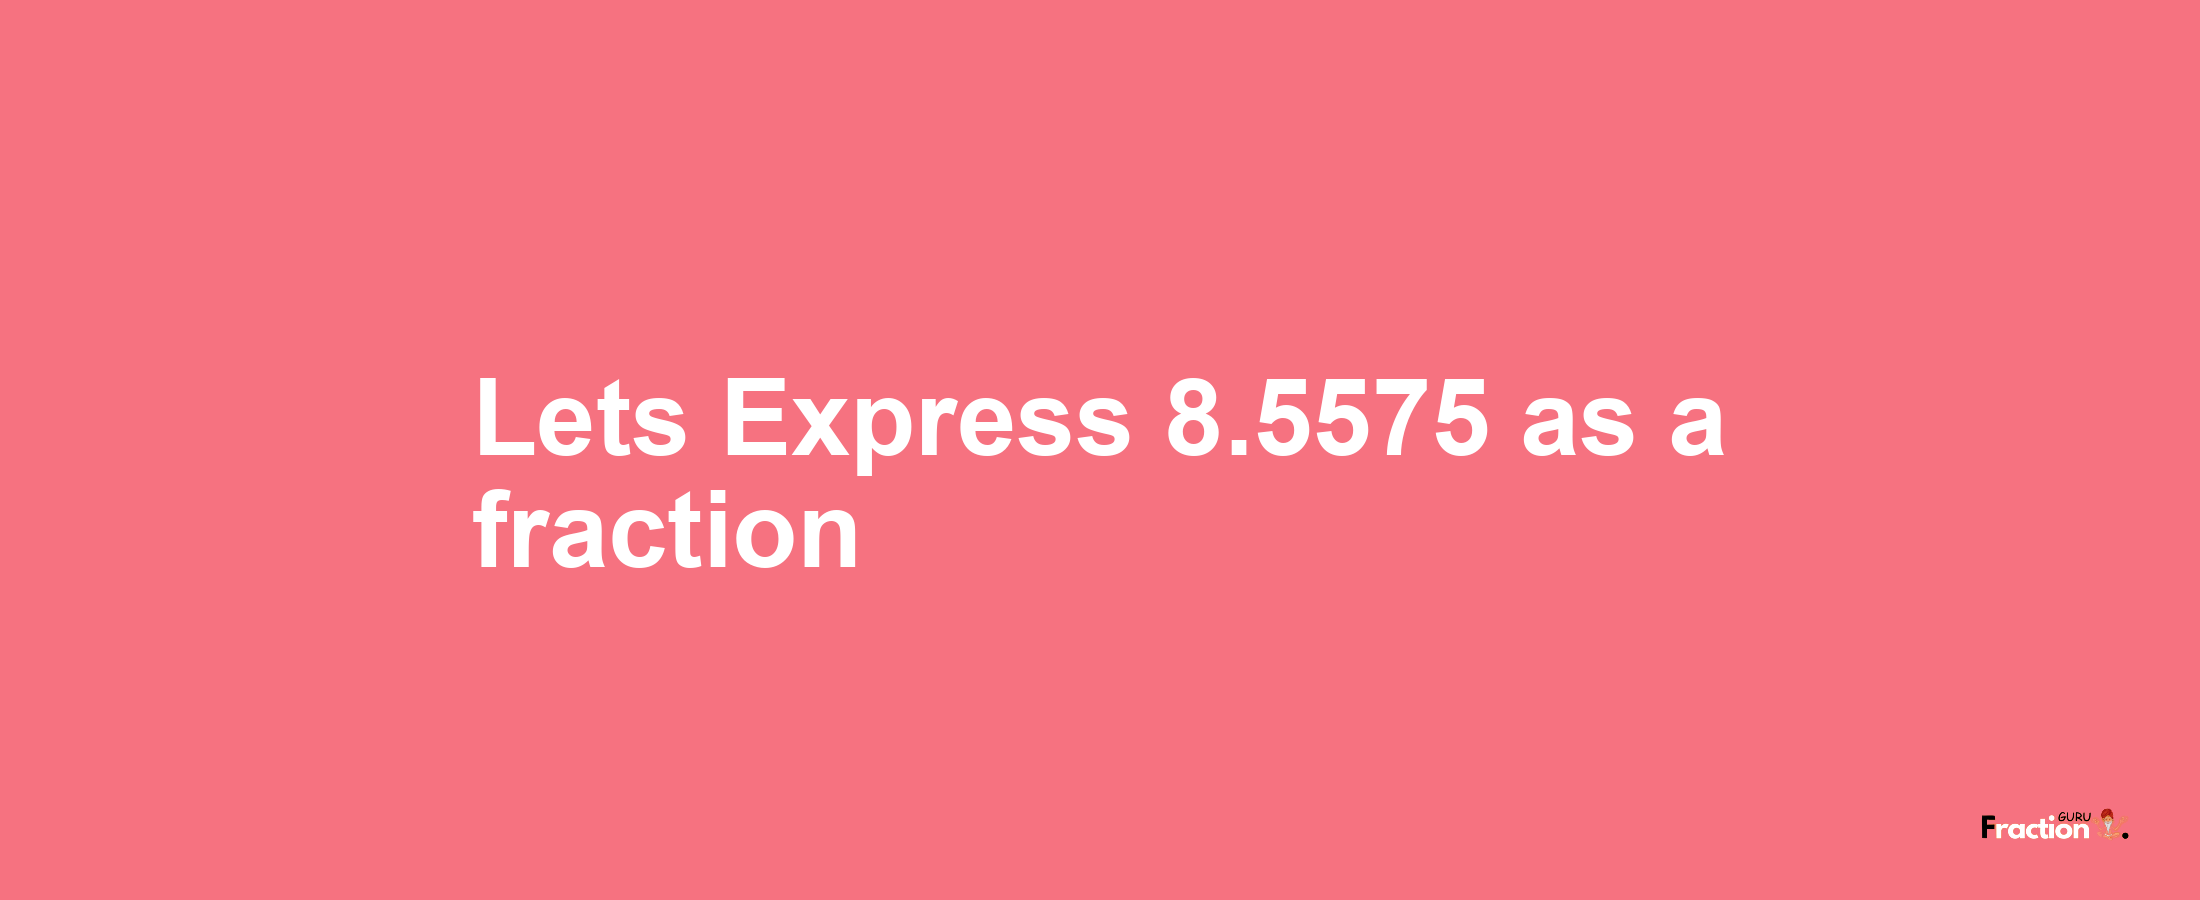 Lets Express 8.5575 as afraction